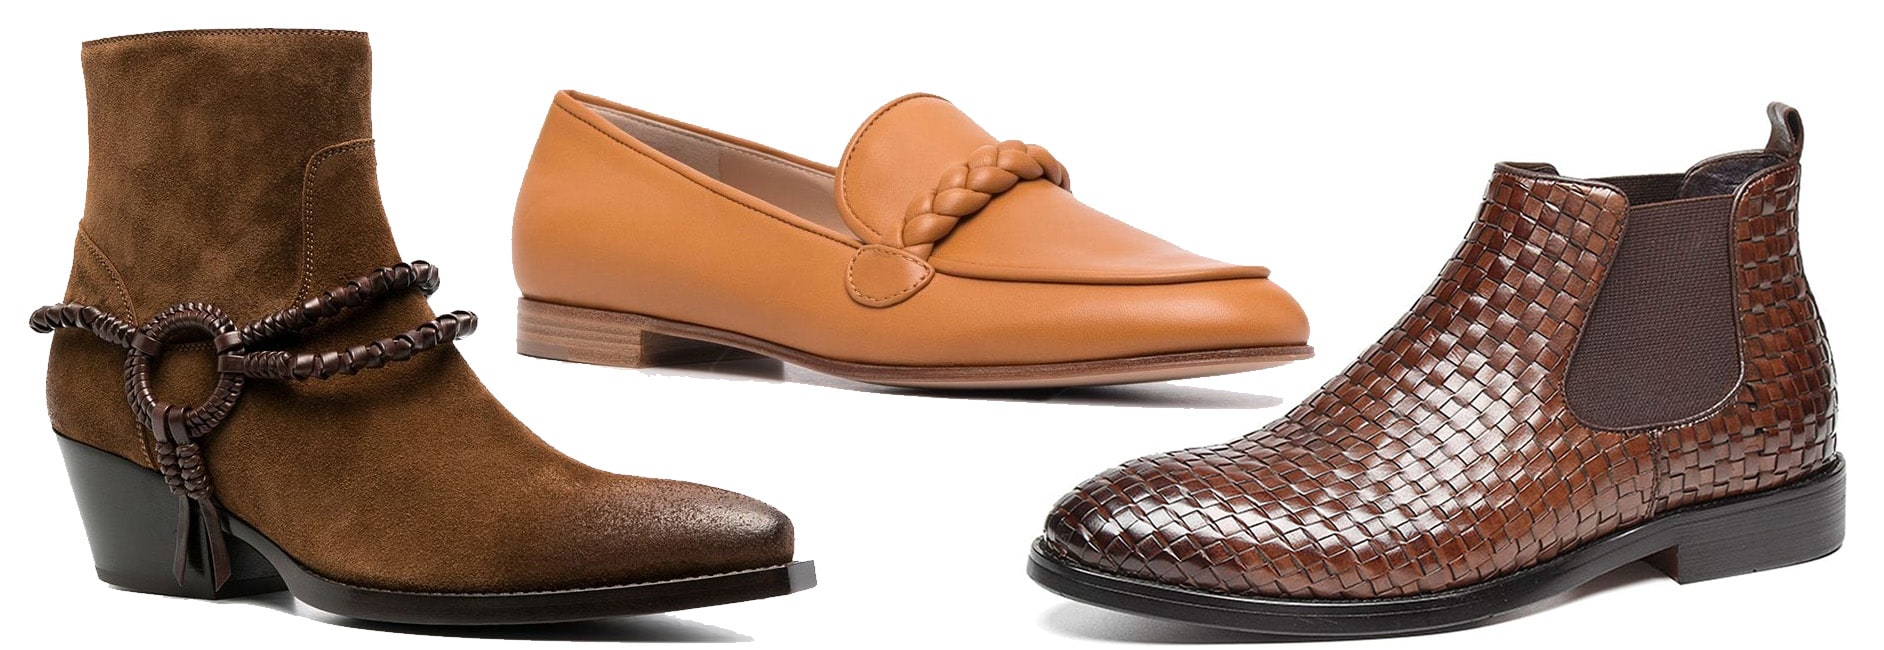 Braided shoes are the perfect blend of traditional craftsmanship and modern style, offering a unique way to elevate your wardrobe